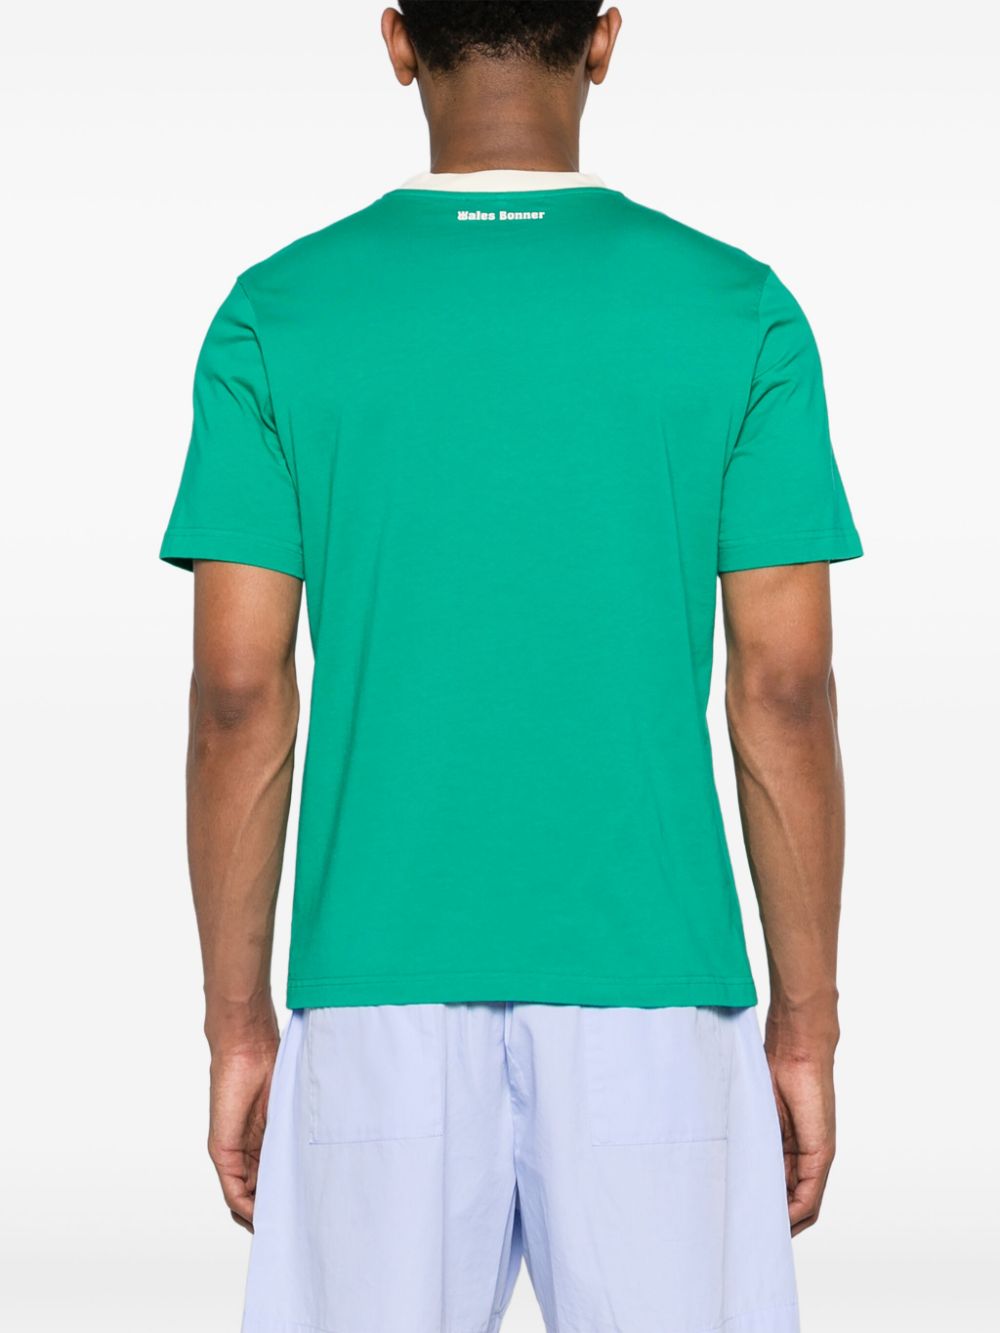 Green t-shirt with print